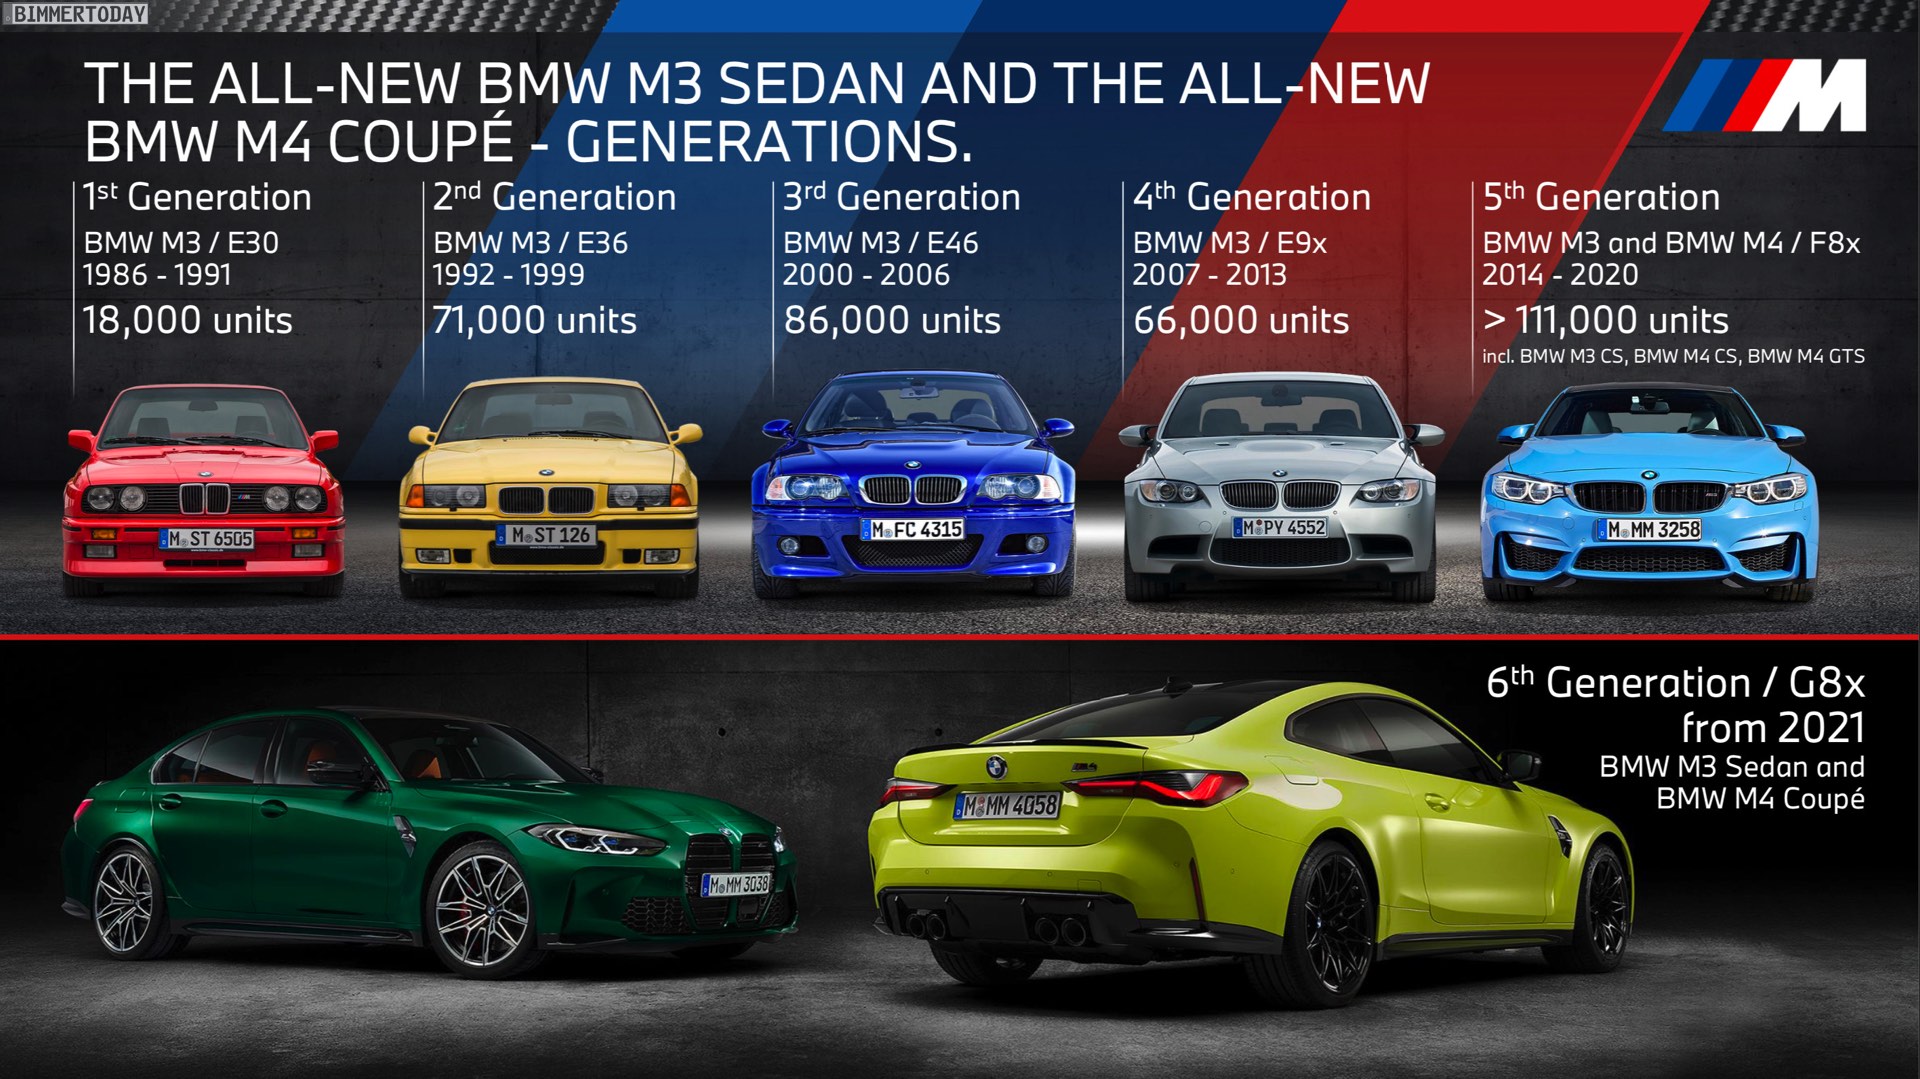 Sales Of Bmw S M3 And M4 Through Five Generations And 35 Years Carscoops